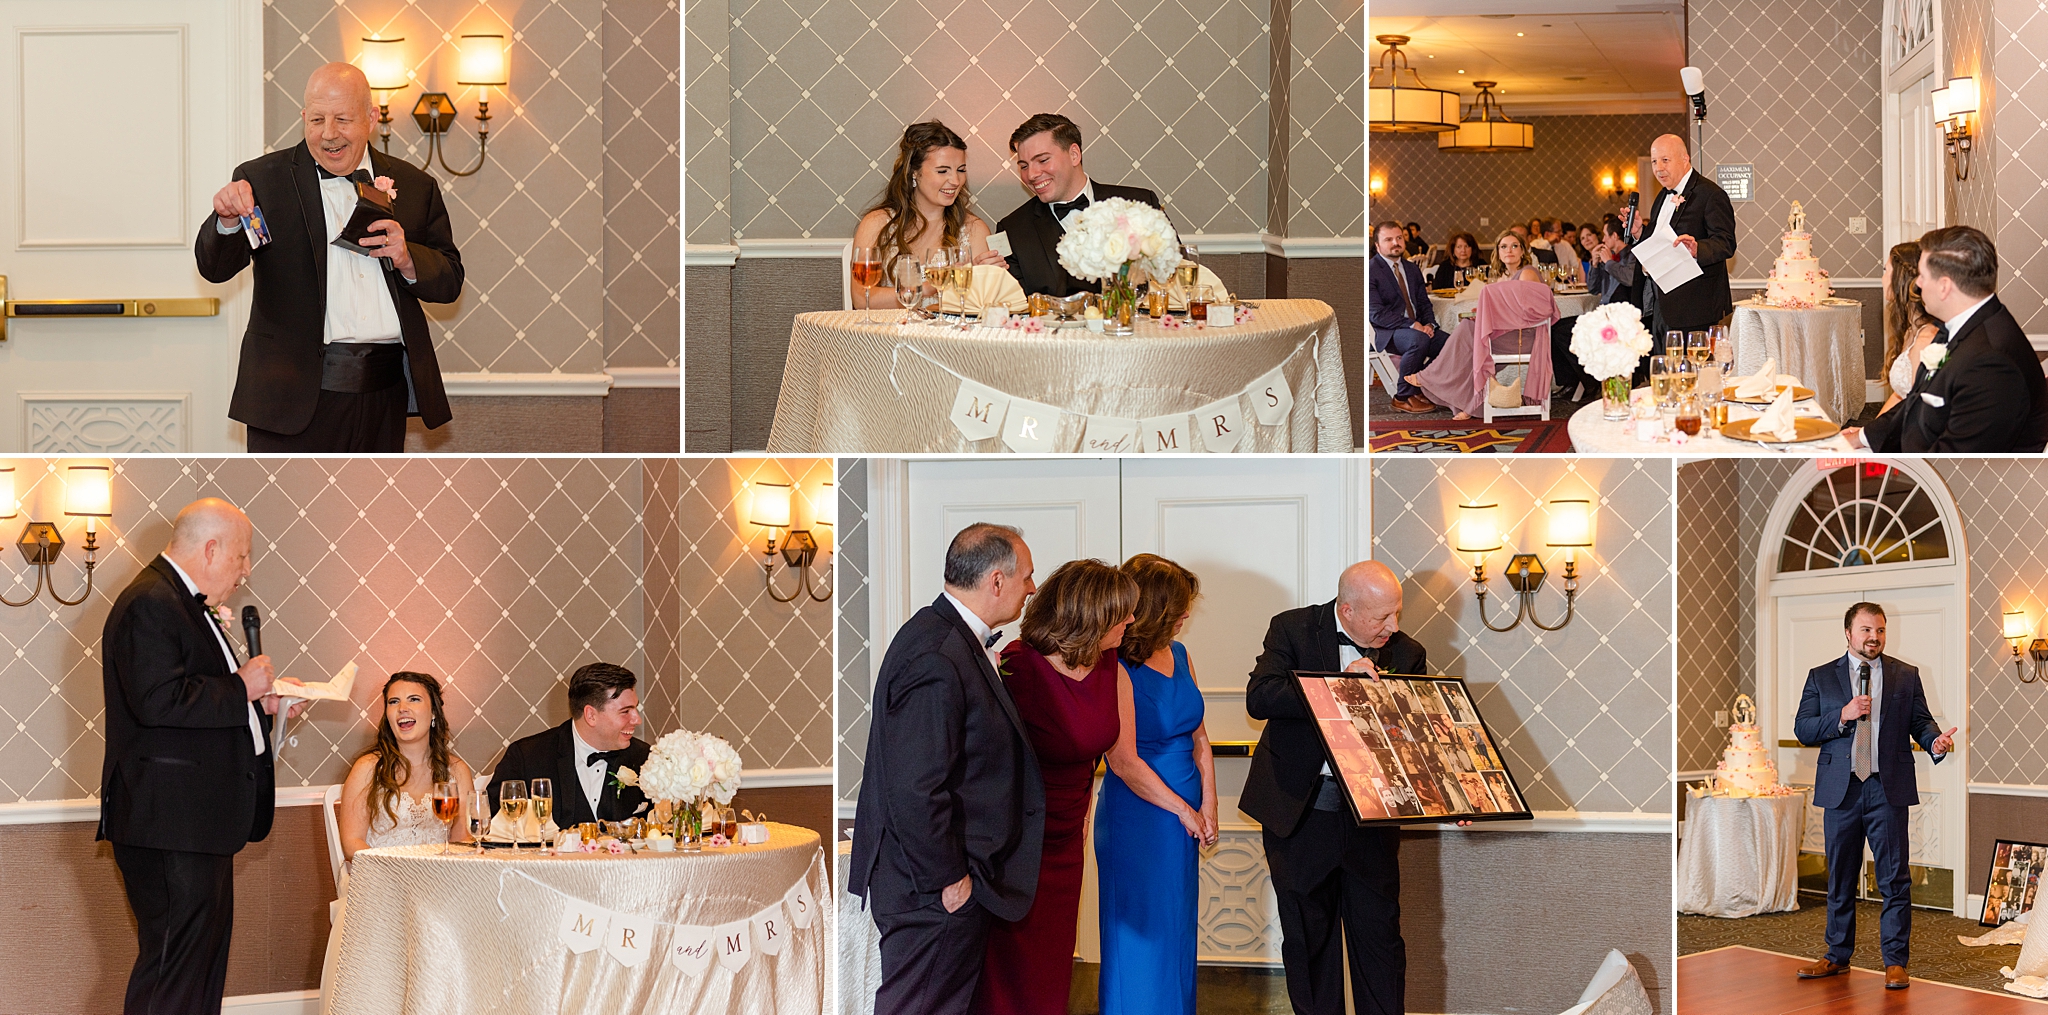 Dad presenting gifts to newlyweds